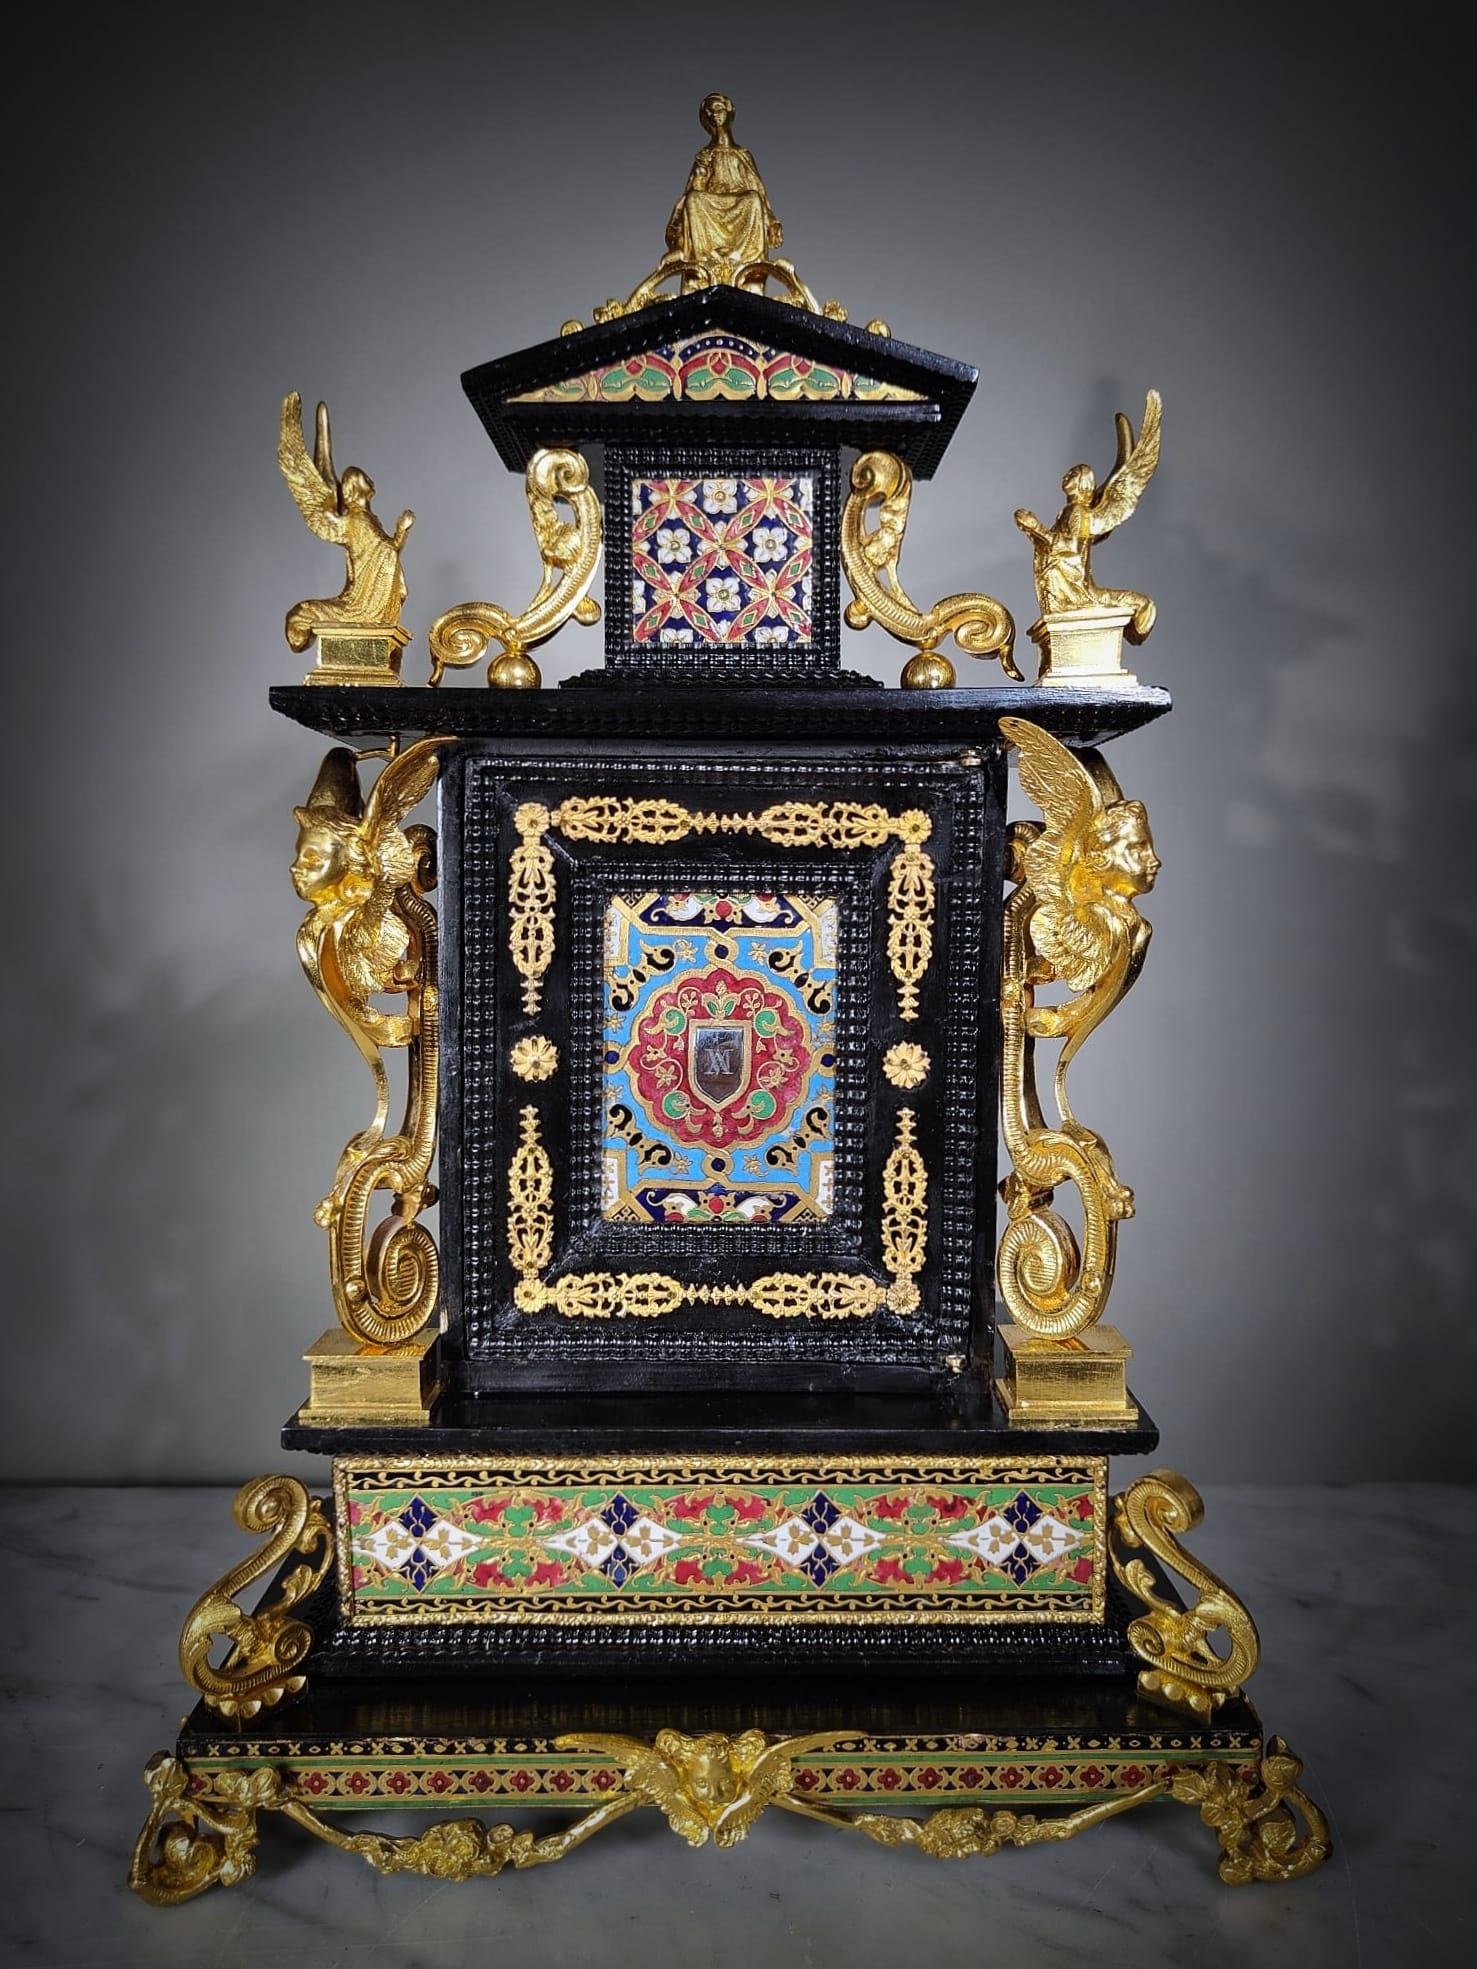 Italian tabernacle from the last quarter of the 17th century made in: mercury-gilt bronze, silver, enamel and ebony-
This spectacular tabernacle due to its quality and rarity is a museum piece.We can highlight the quality of the chiselled and gilt